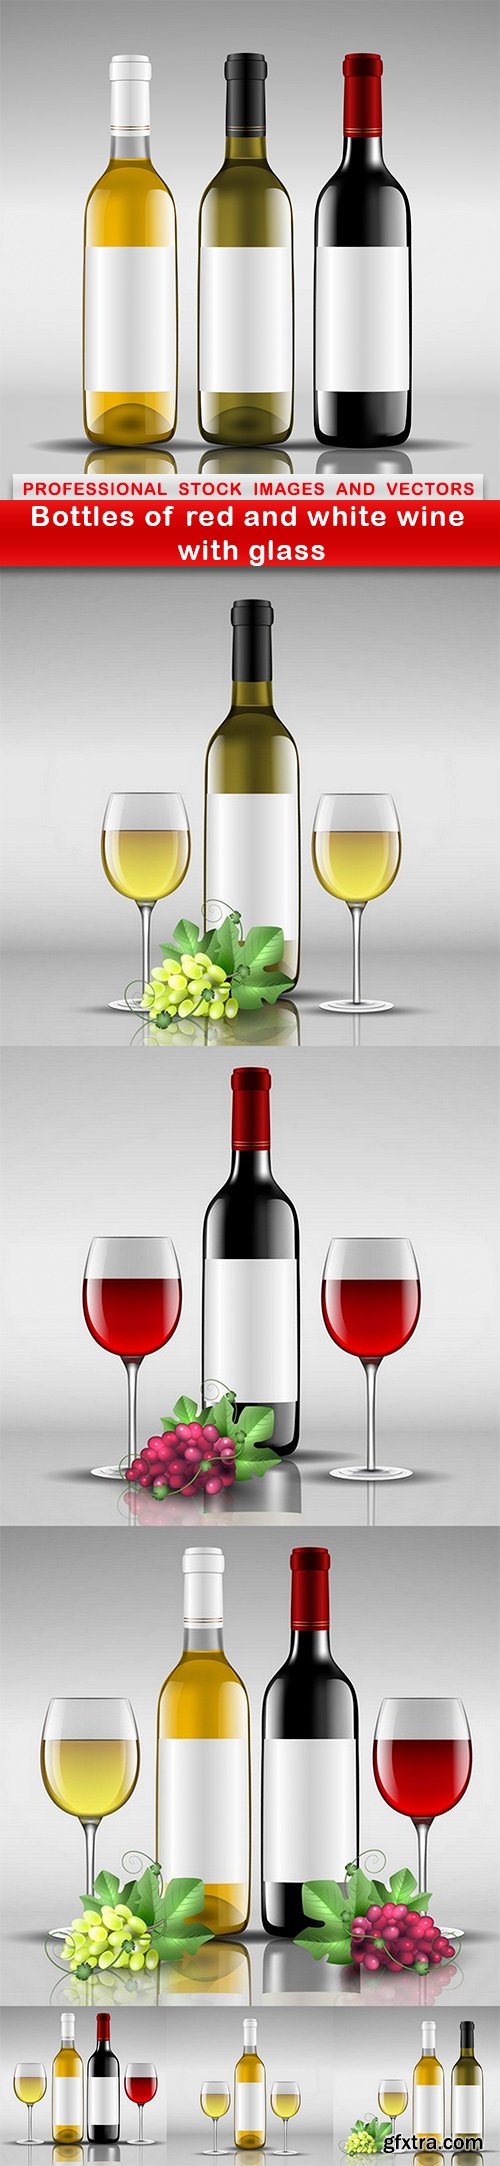 Bottles of red and white wine with glass - 7 EPS